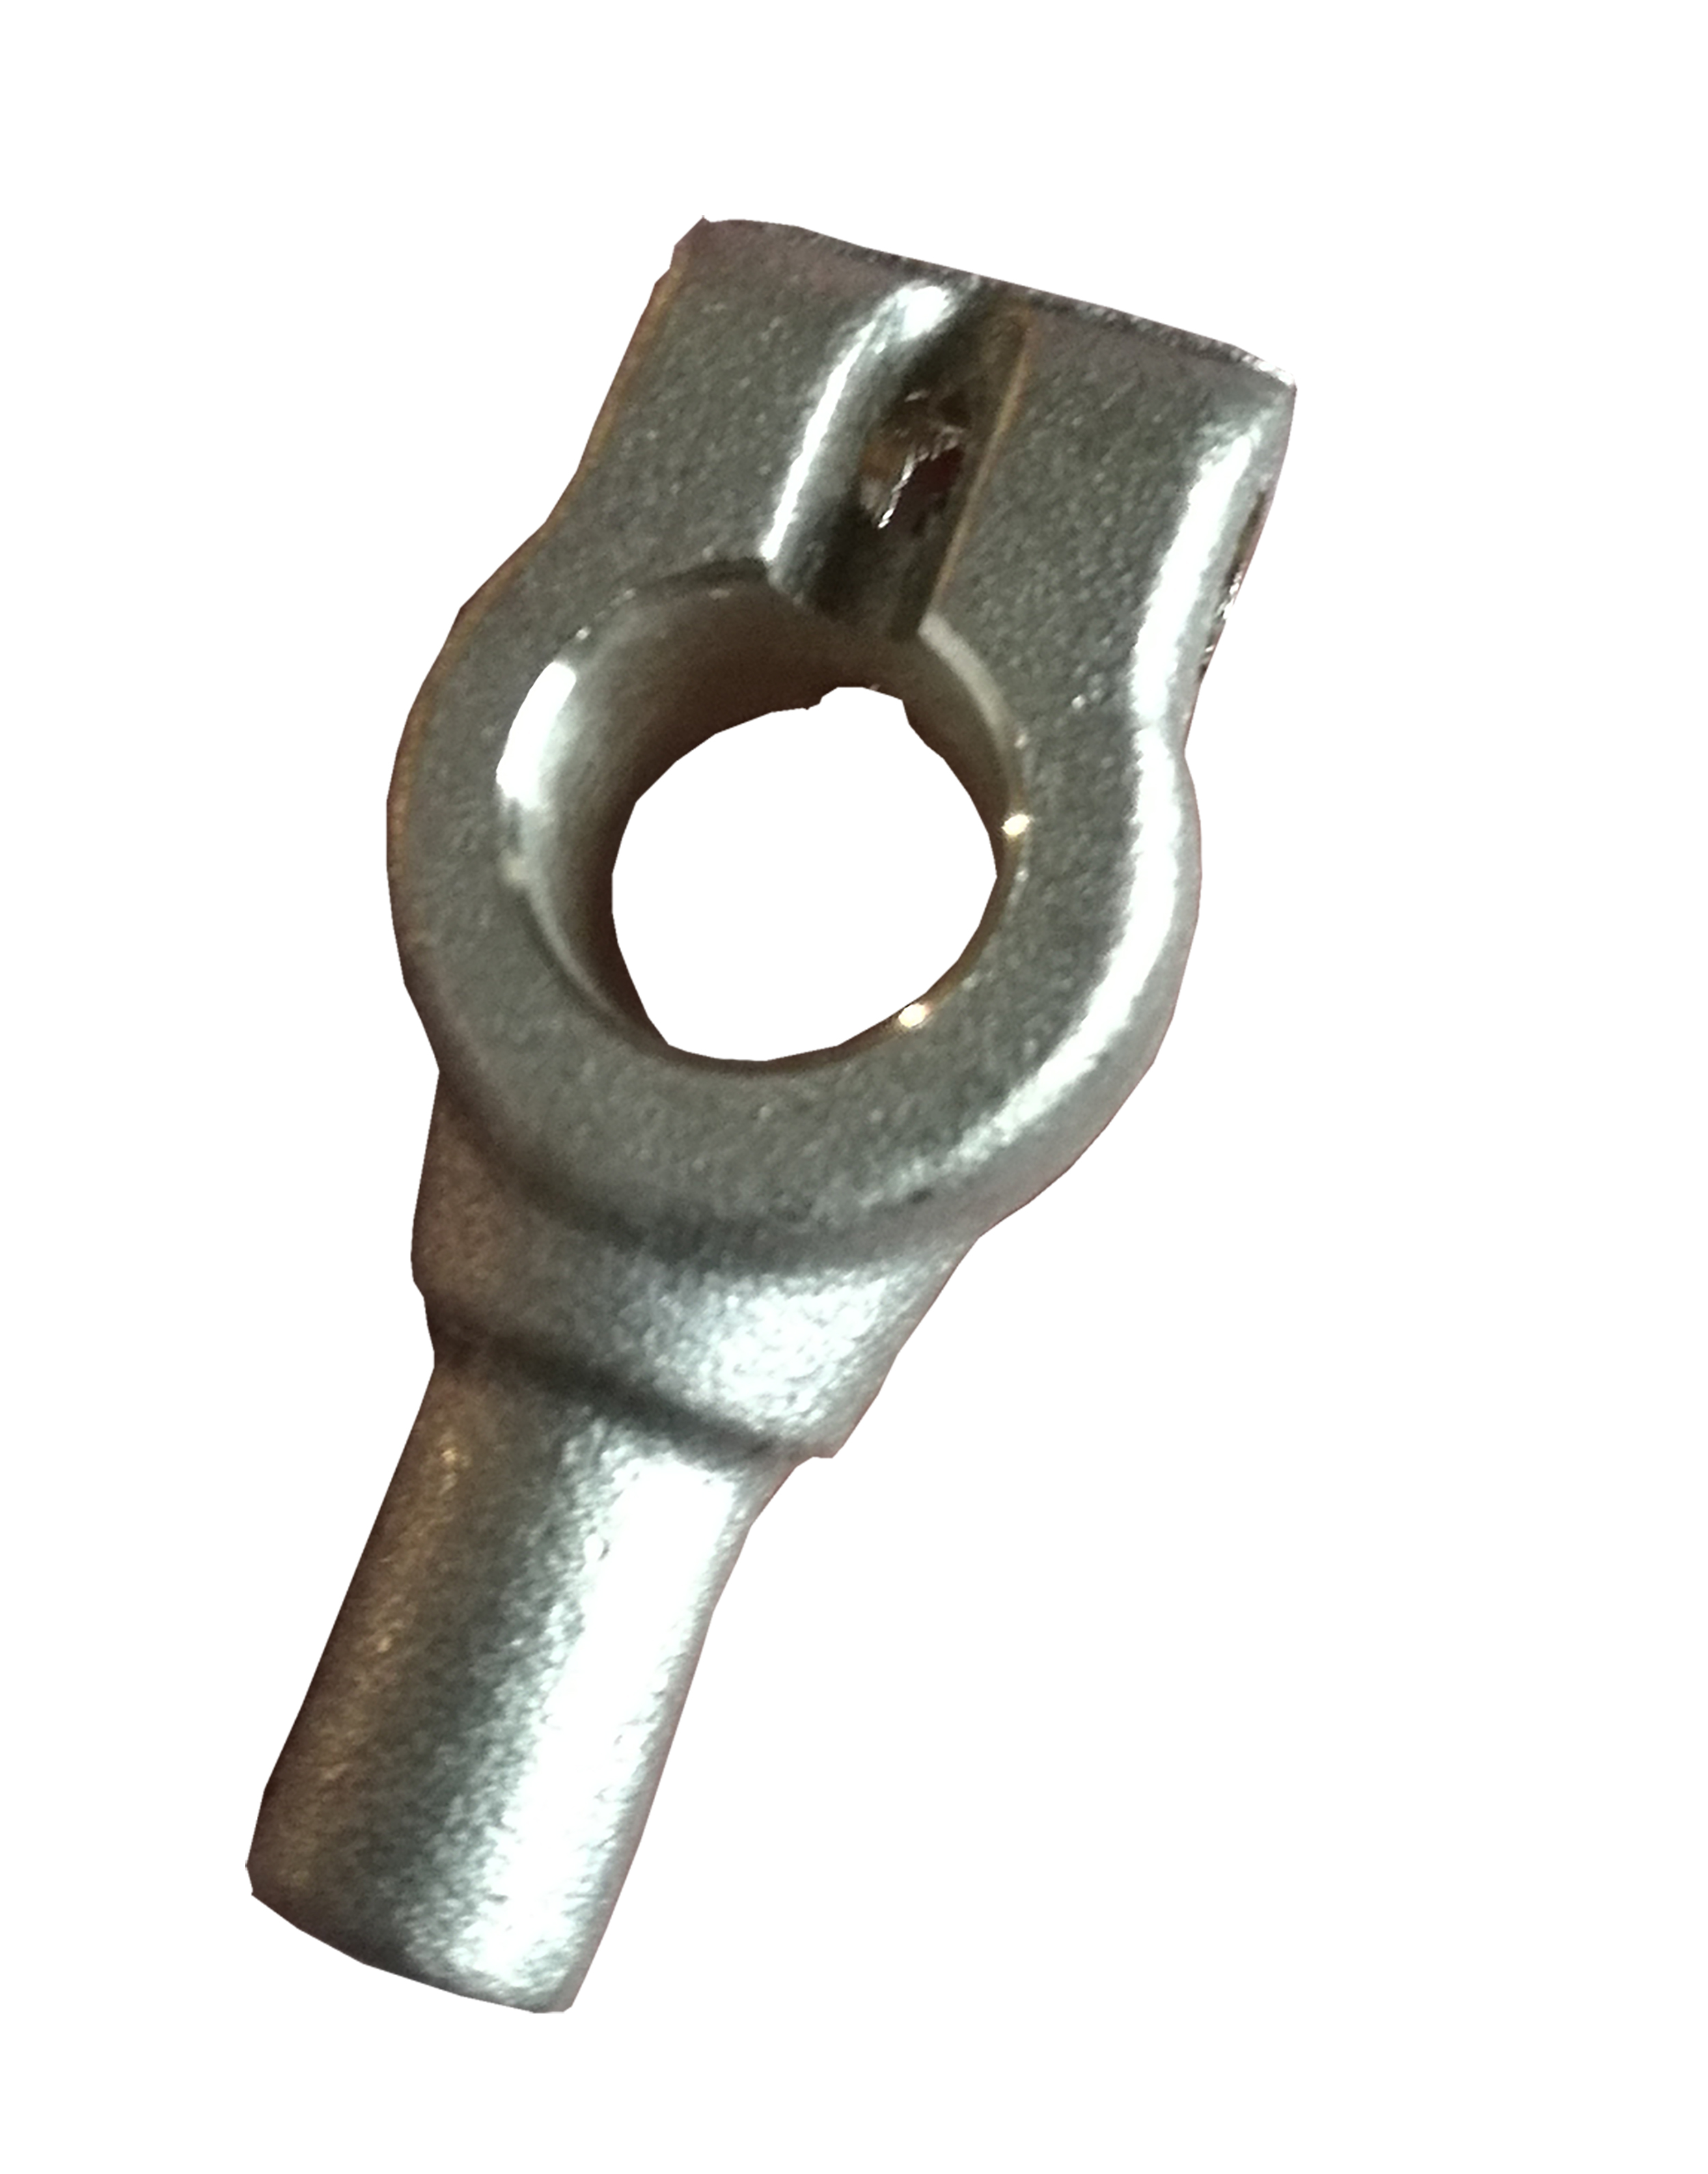 China Manufacturer for Bronze Casting Supplier - Brass casting    C86700, LG2, G1, G-cuSn5ZnPb, G-CuPb20Sn  – Neuland Metals